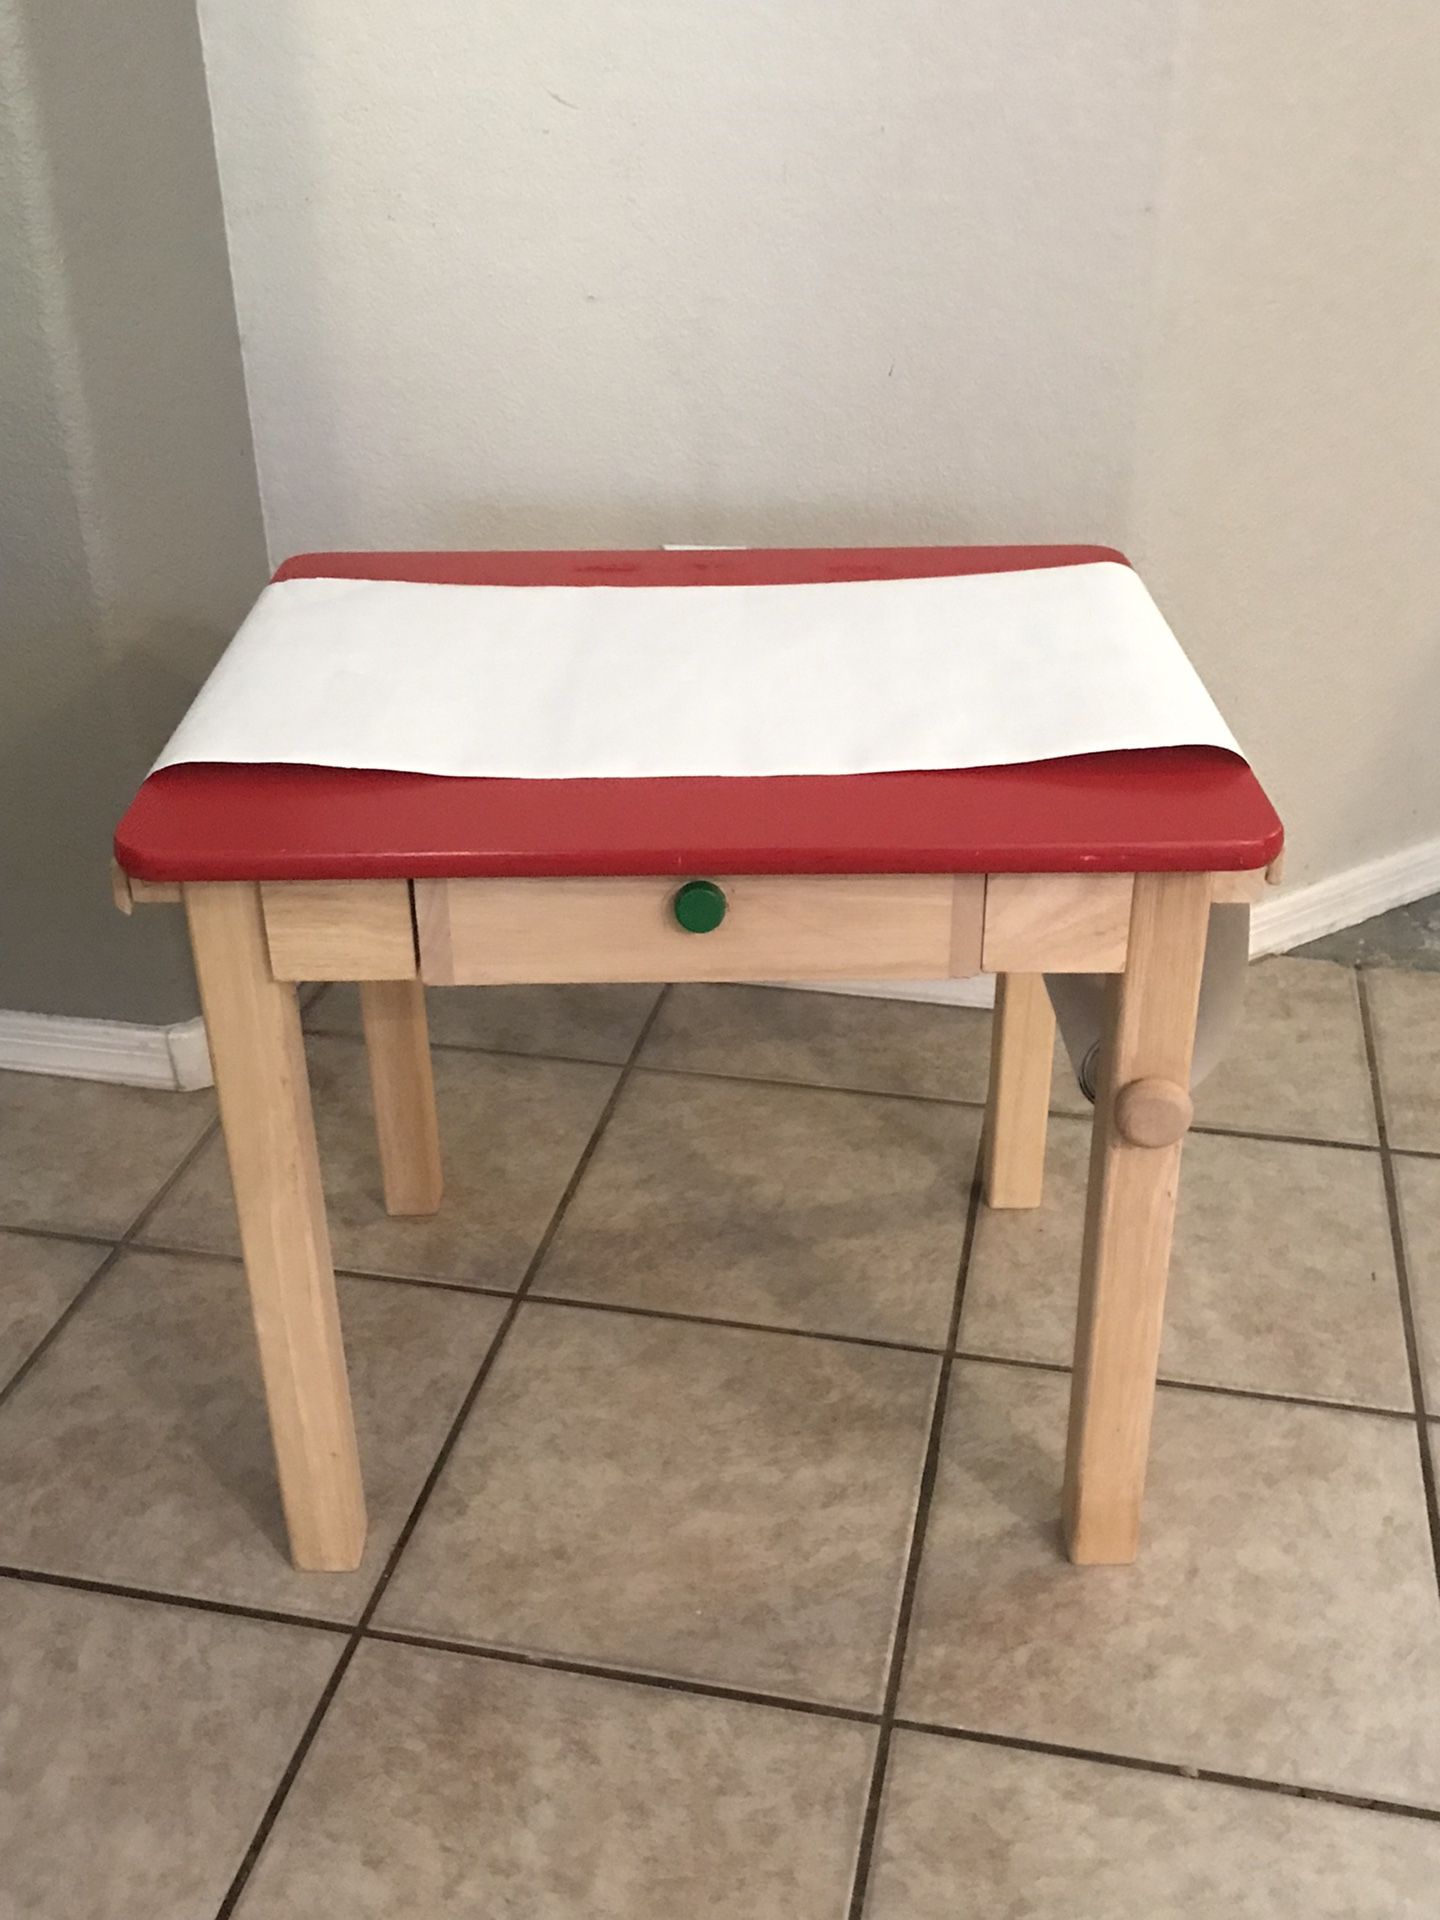 GUIDECRAFT CHILDRENS ACTIVITY DESK  WITH PAPER ROLL SOLID WOOD